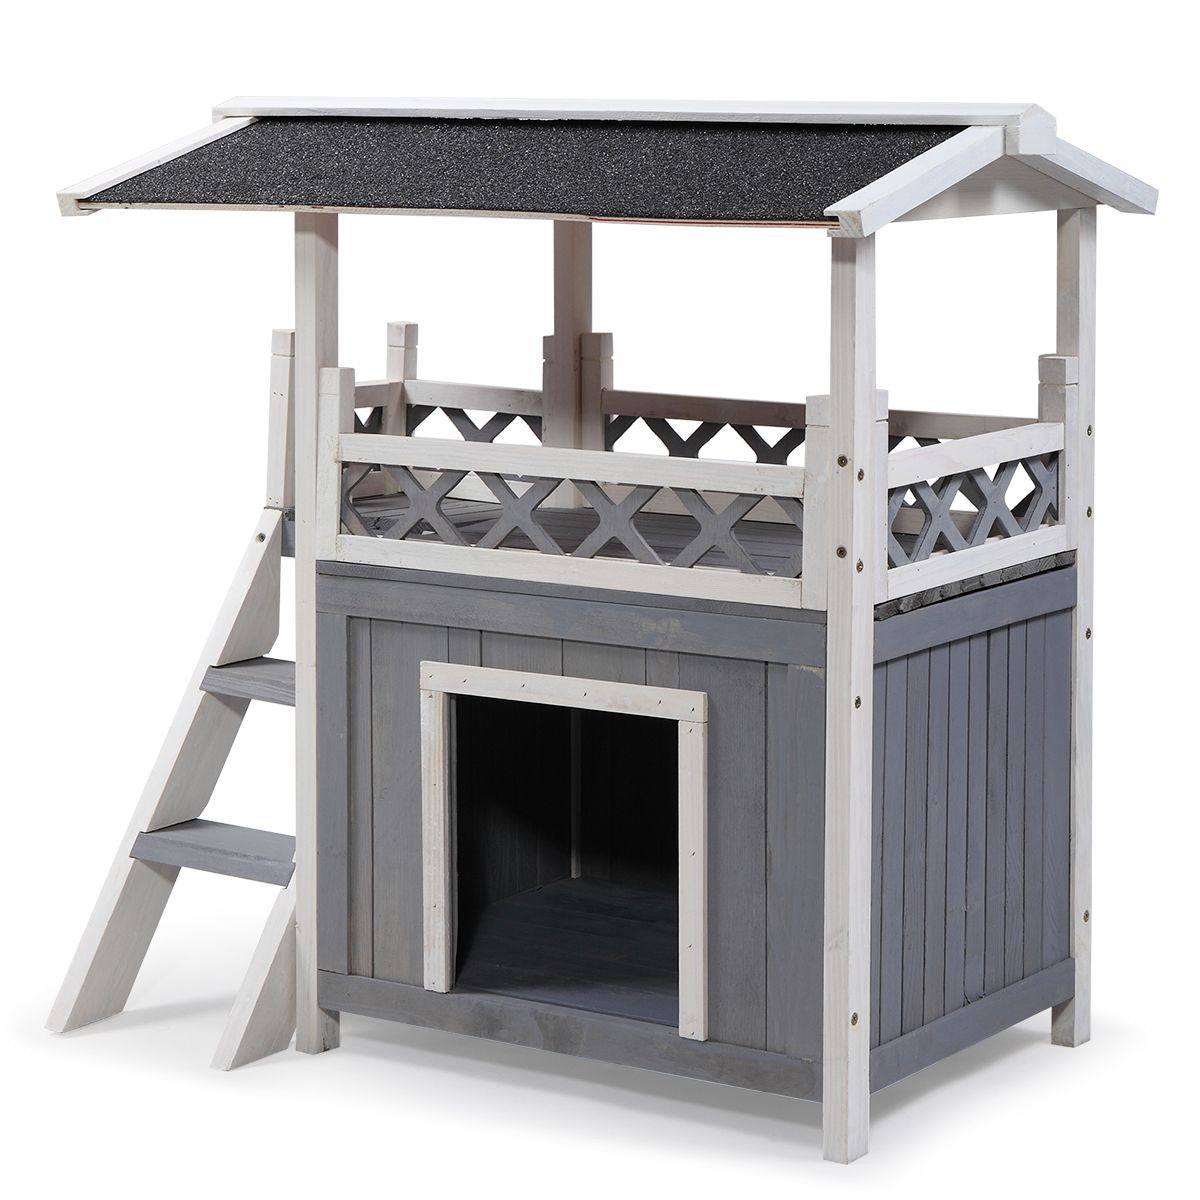 MOCA AUTOPARTS 2-Tier Wood Dog/Cat/Rabbit House, Rustic Pet Home with Roof and Ladder, Pet Shelter for Indoor and Outdoor, Gray